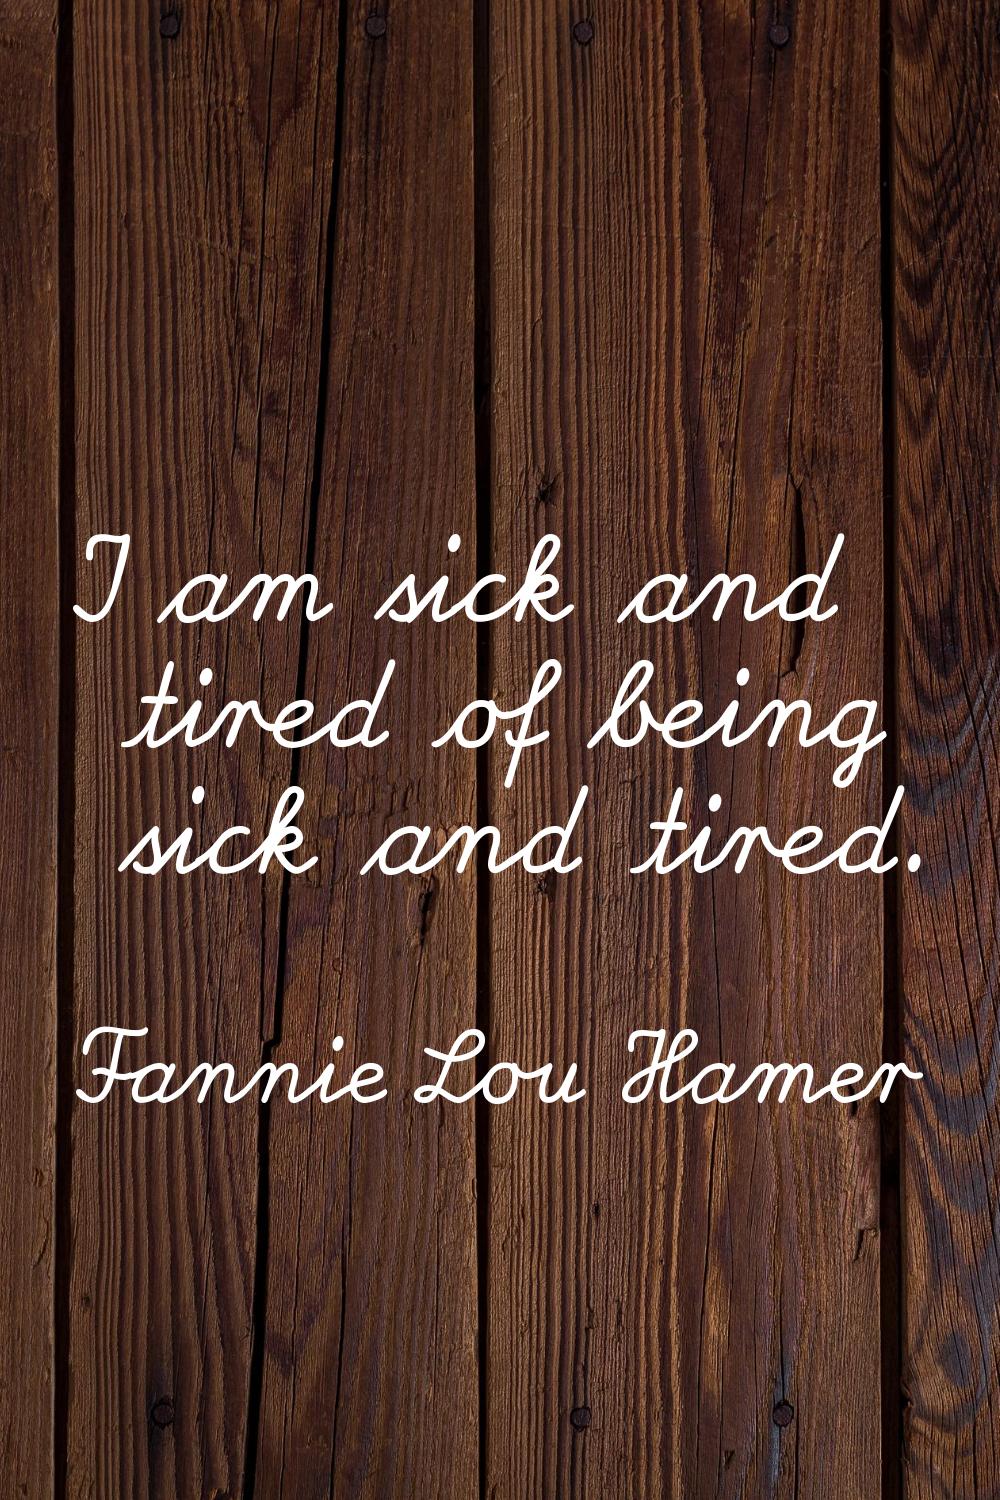 I am sick and tired of being sick and tired.